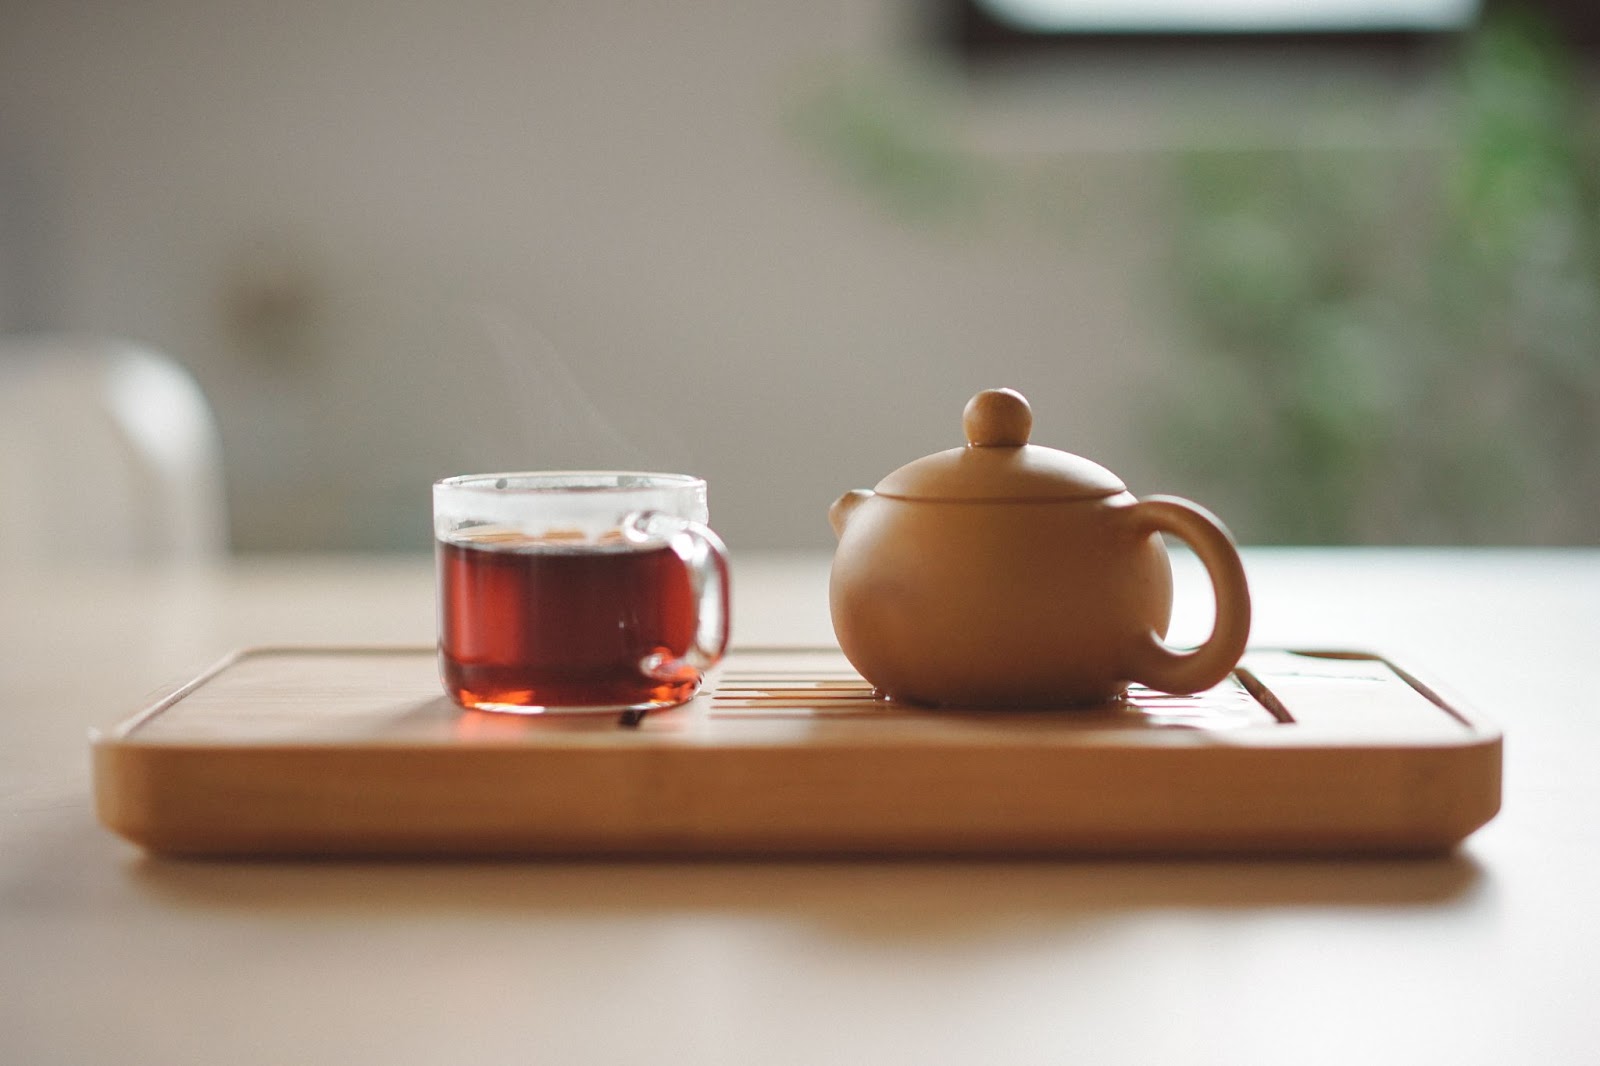  A cup of tea sitting next to a small kettle.